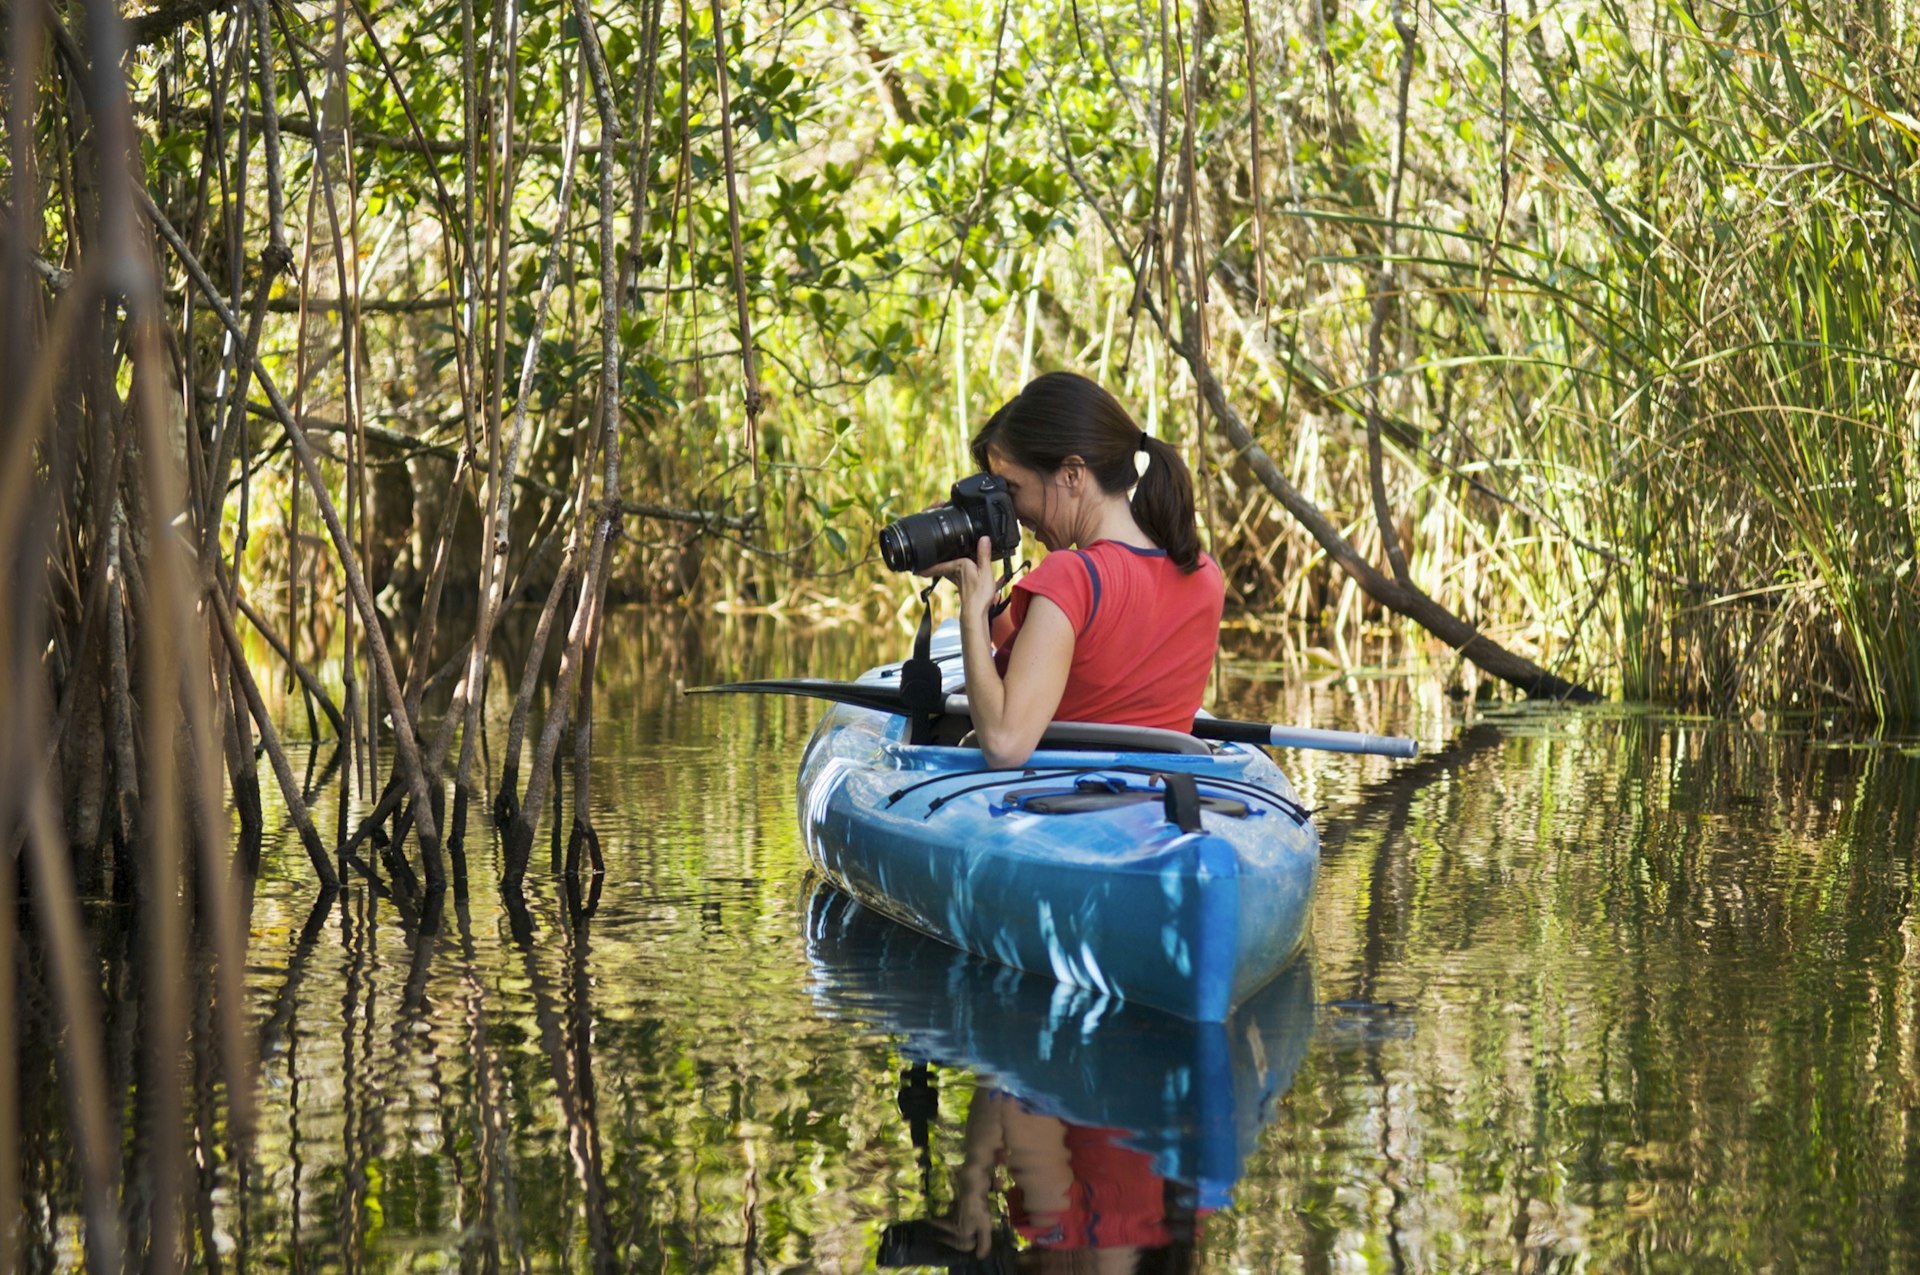 Capturing a moment on a kayak in the Everglades